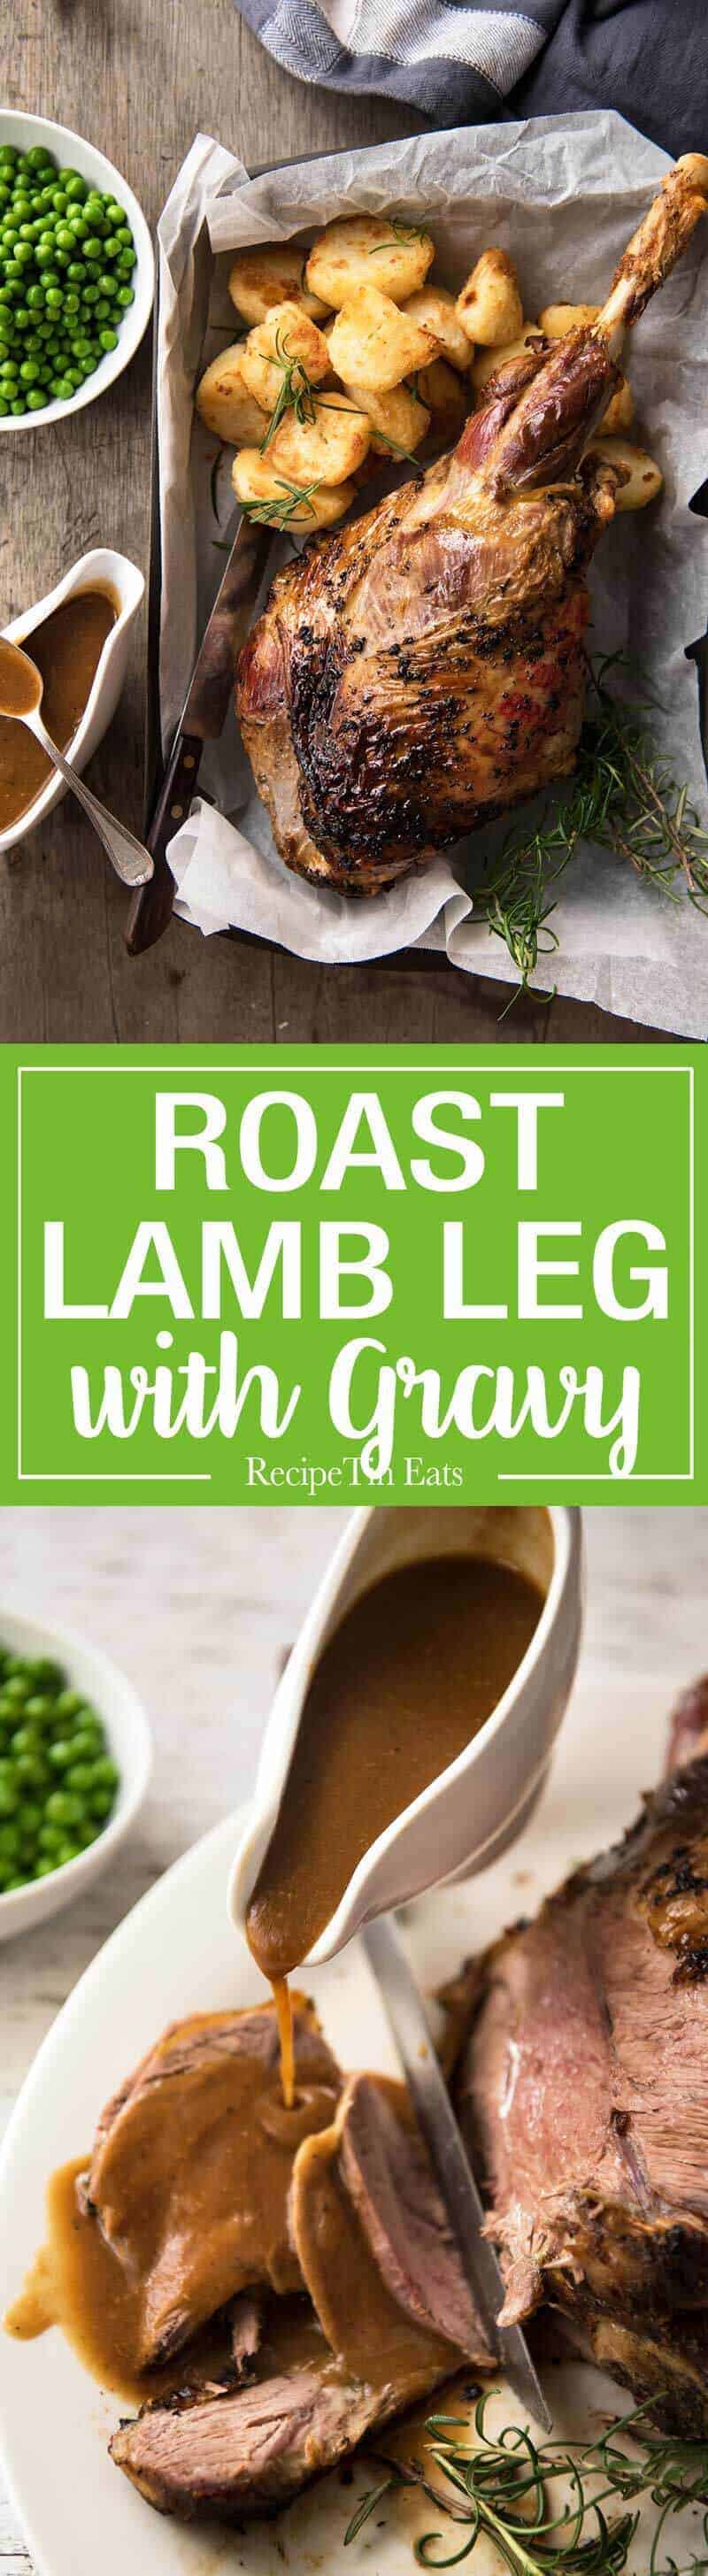 A classic, perfectly cooked Roast Lamb Leg with a classic smooth, rich gravy. It's Lambalicious! www.recipetineats.com